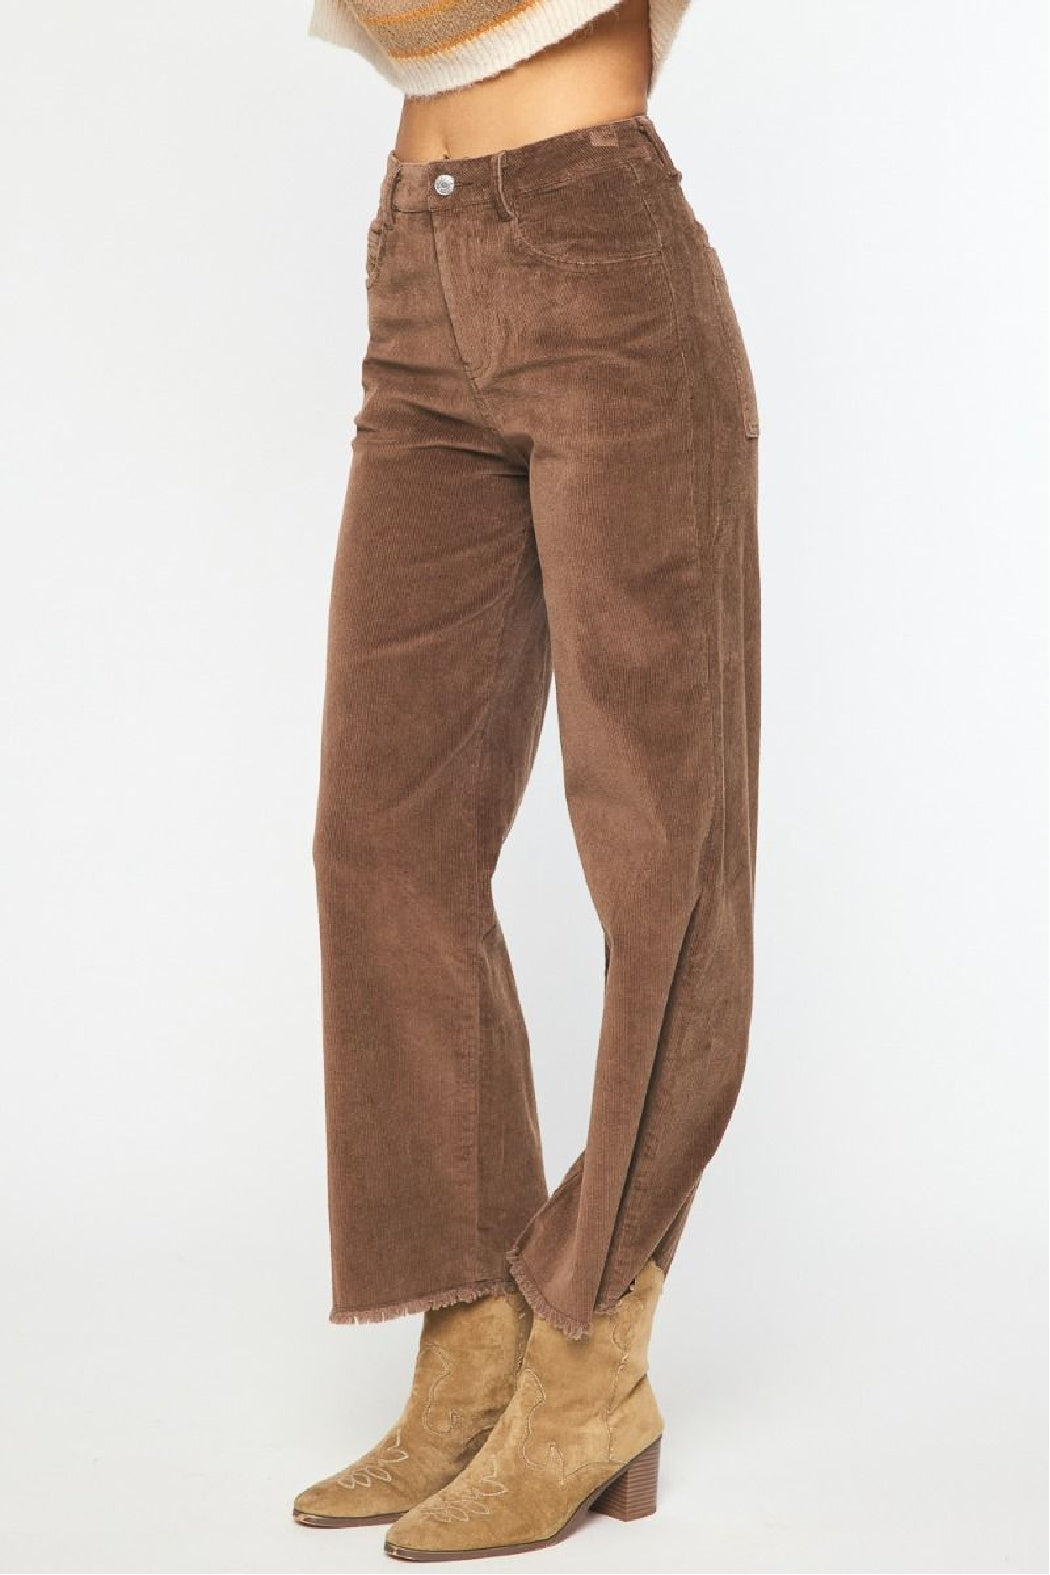 2022 Spring and Autumn Brown Corduroy Pants National Tide Wide-leg